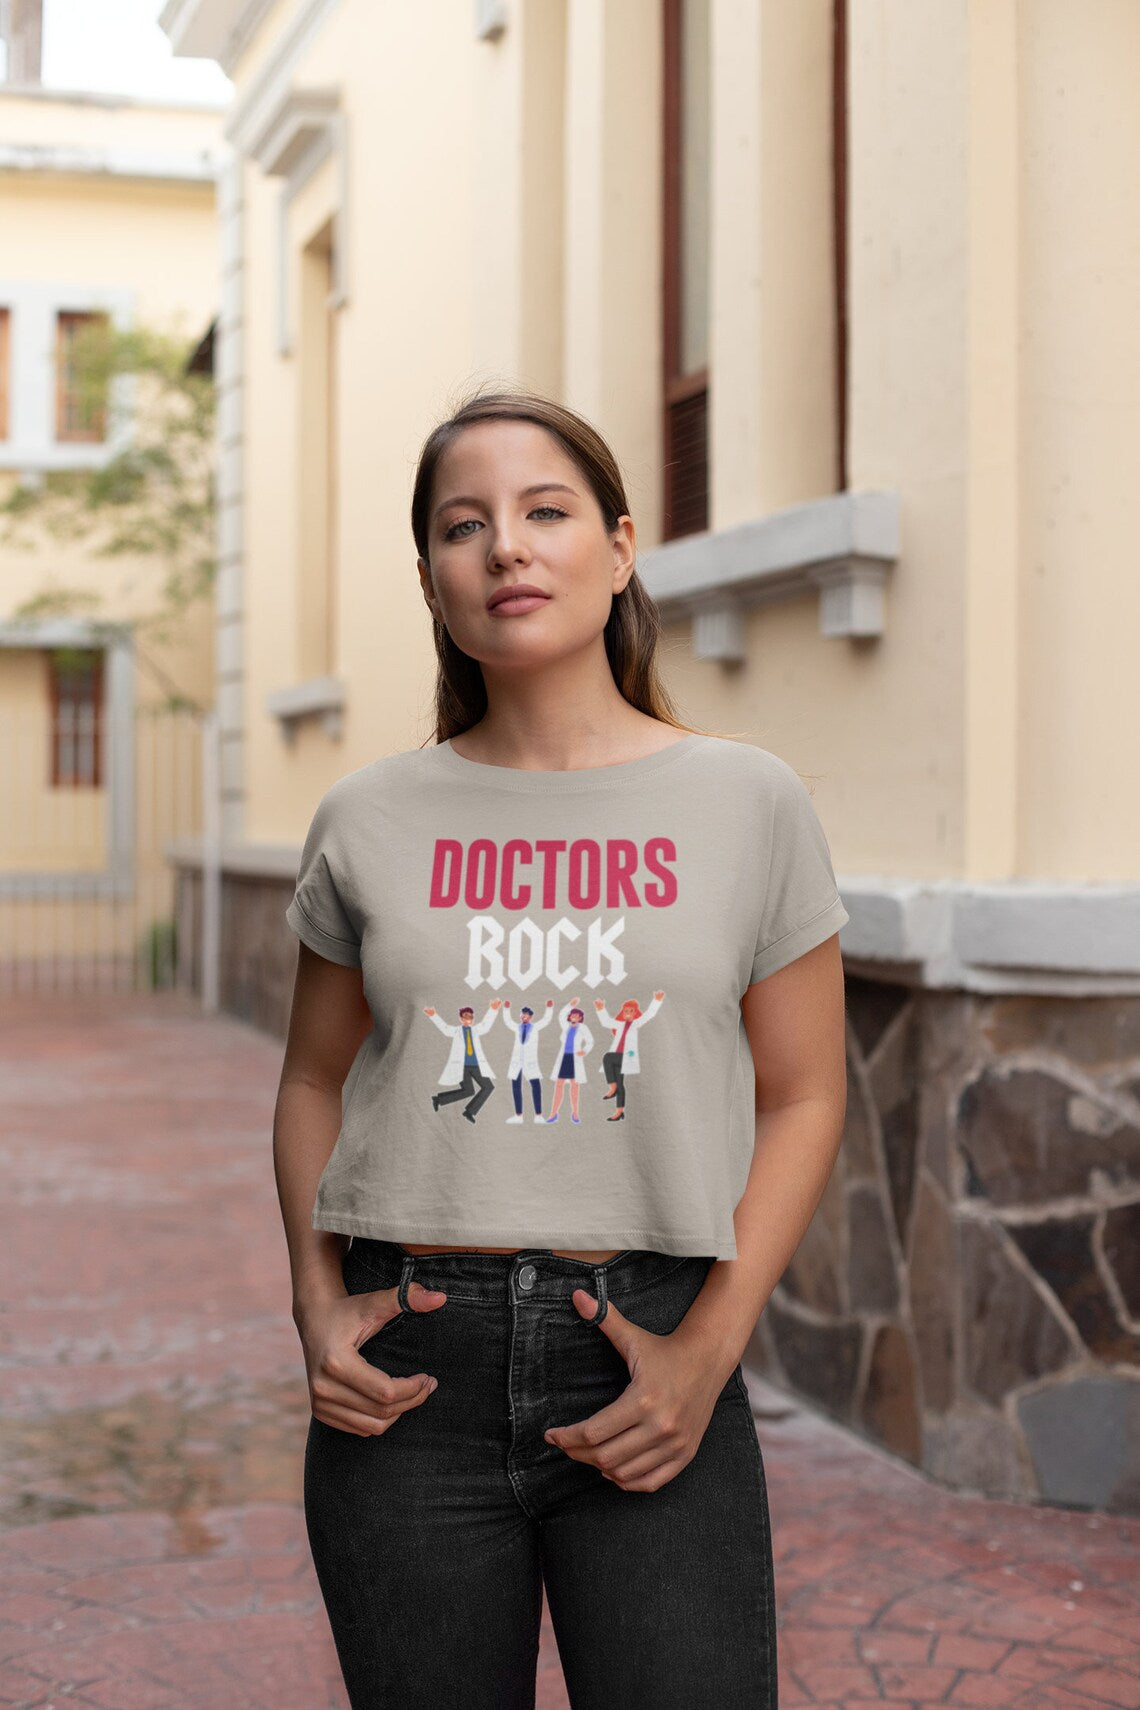 Doctors Rock Women's Flowy Cropped Tee, Doctor shirts, Doctor gift ideas, New Doctor shirt, gift for doctor, Doctor team shirt